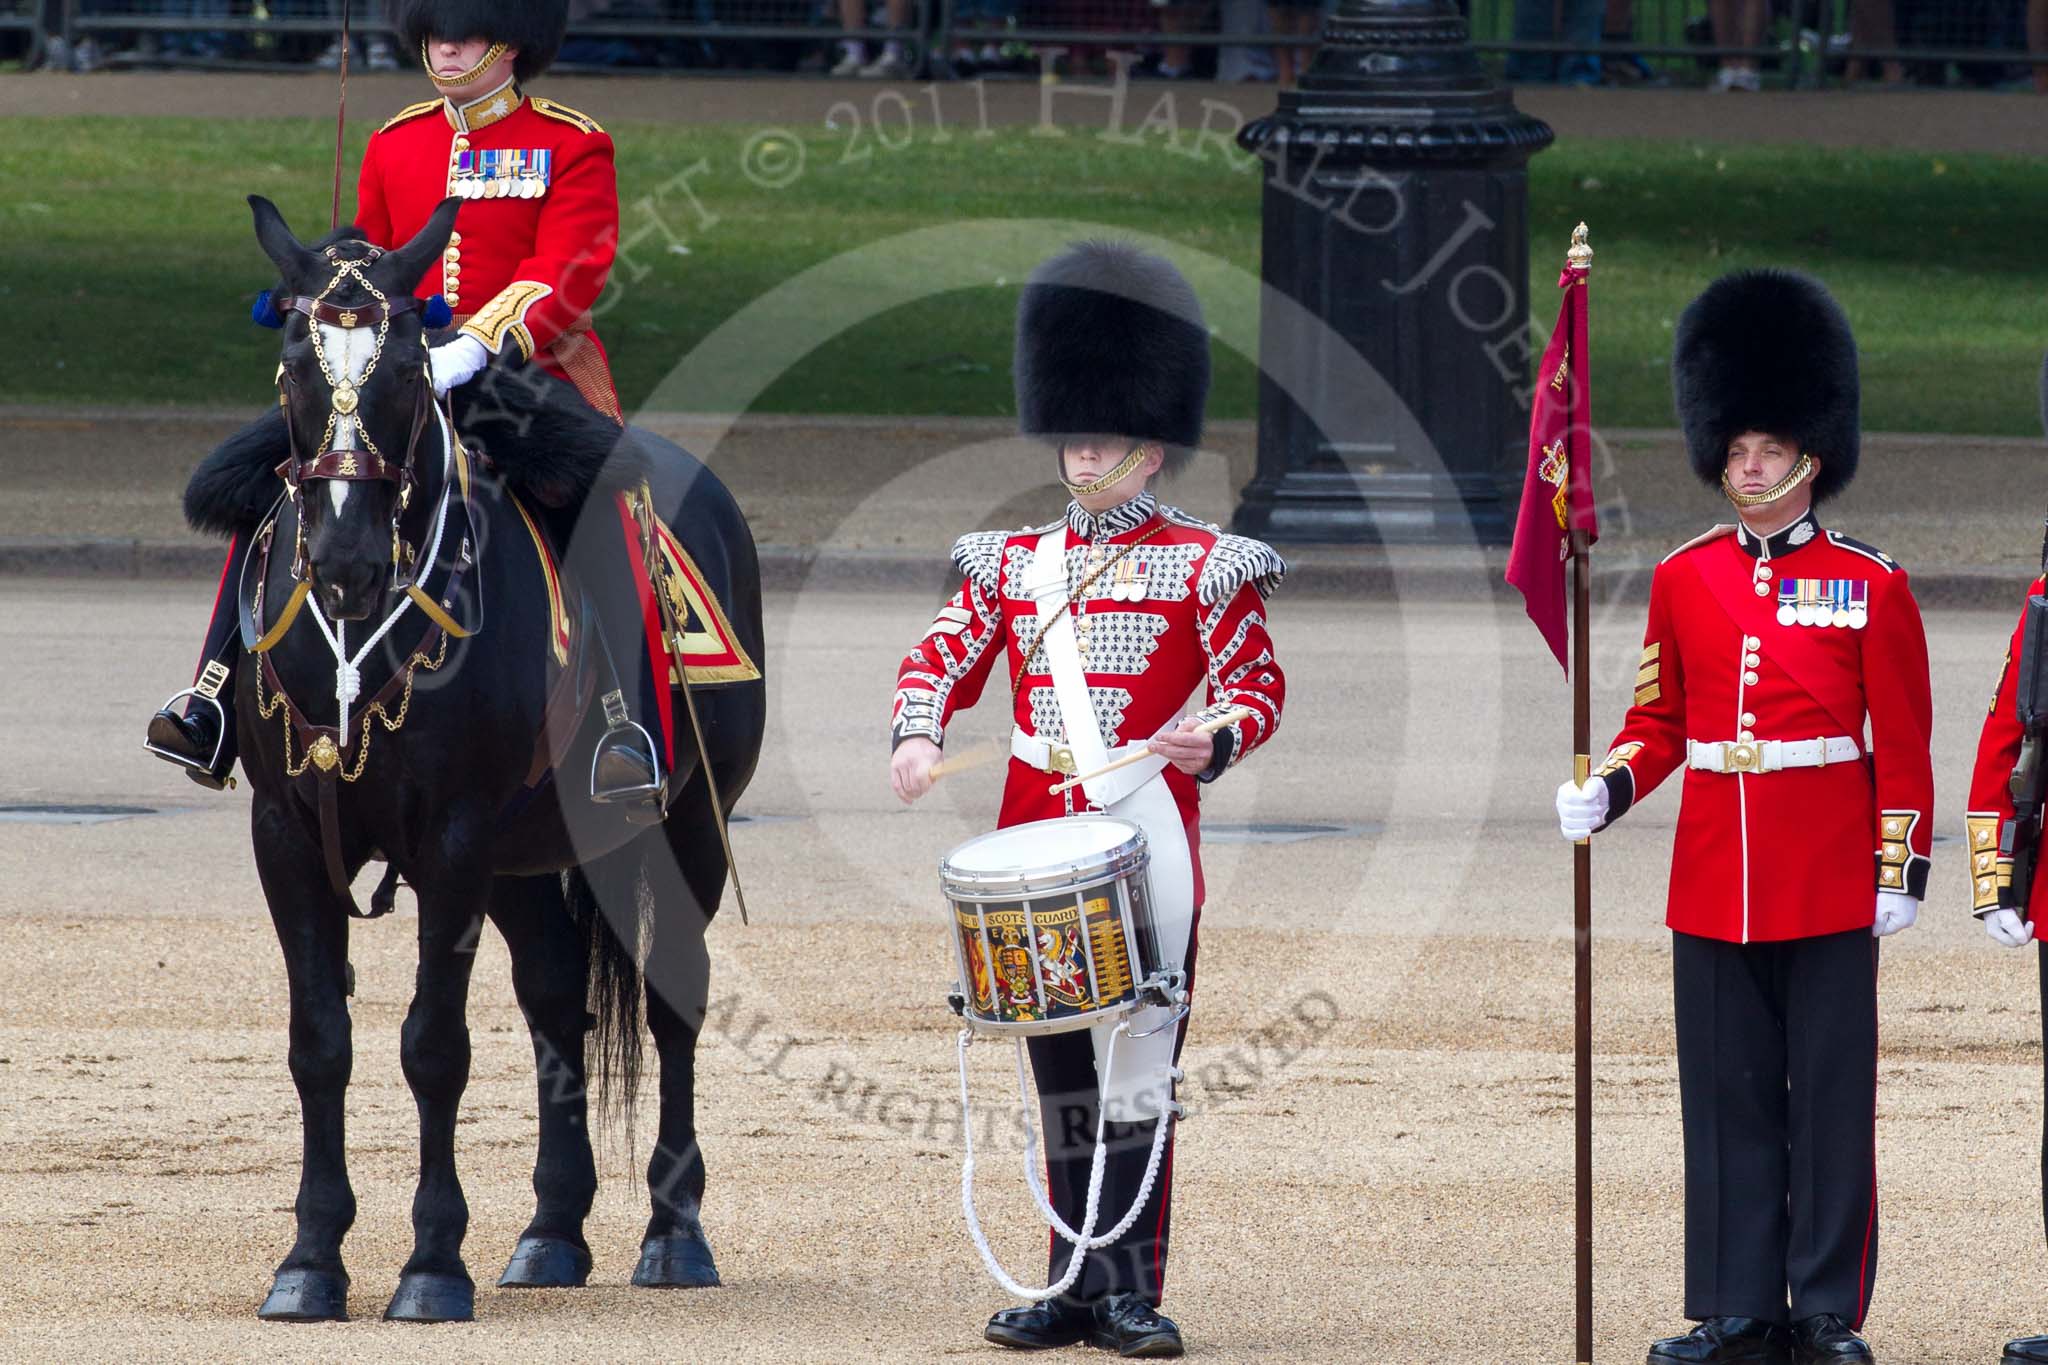 The Colonel's Review 2011: From left to right: Major B P N Ramsay, Welsh Guards, The Major of the Parade, then the 'Lone Drummer', Lance Corporal Gordon Prescott, Scots Guards, and the 'Keeper of the Ground' of No. 1 Guard, 1st Battalion Scots Guards..
Horse Guards Parade, Westminster,
London SW1,

United Kingdom,
on 04 June 2011 at 11:14, image #118